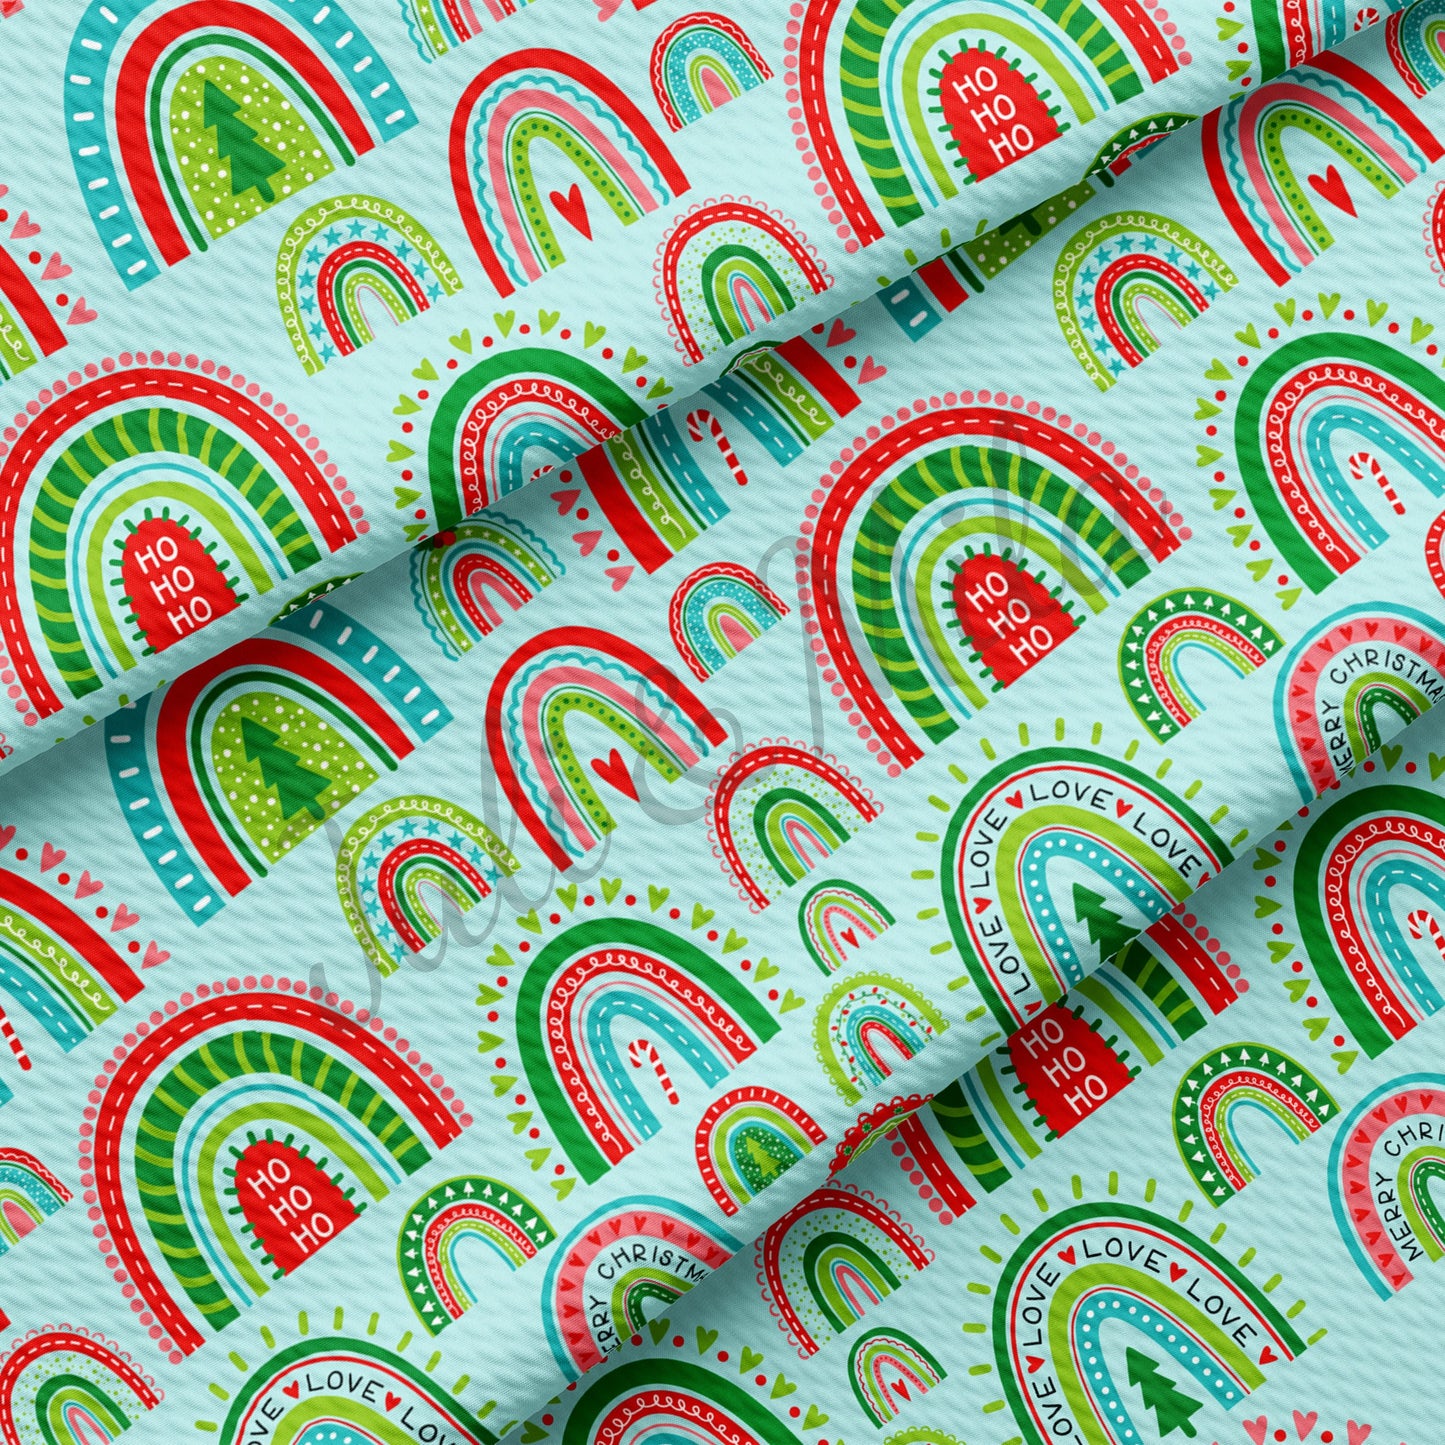 Printed Liverpool Bullet Textured Fabric by the yard 4Way Stretch Solid Strip Thick Knit Jersey Liverpool Fabric Rainbow25